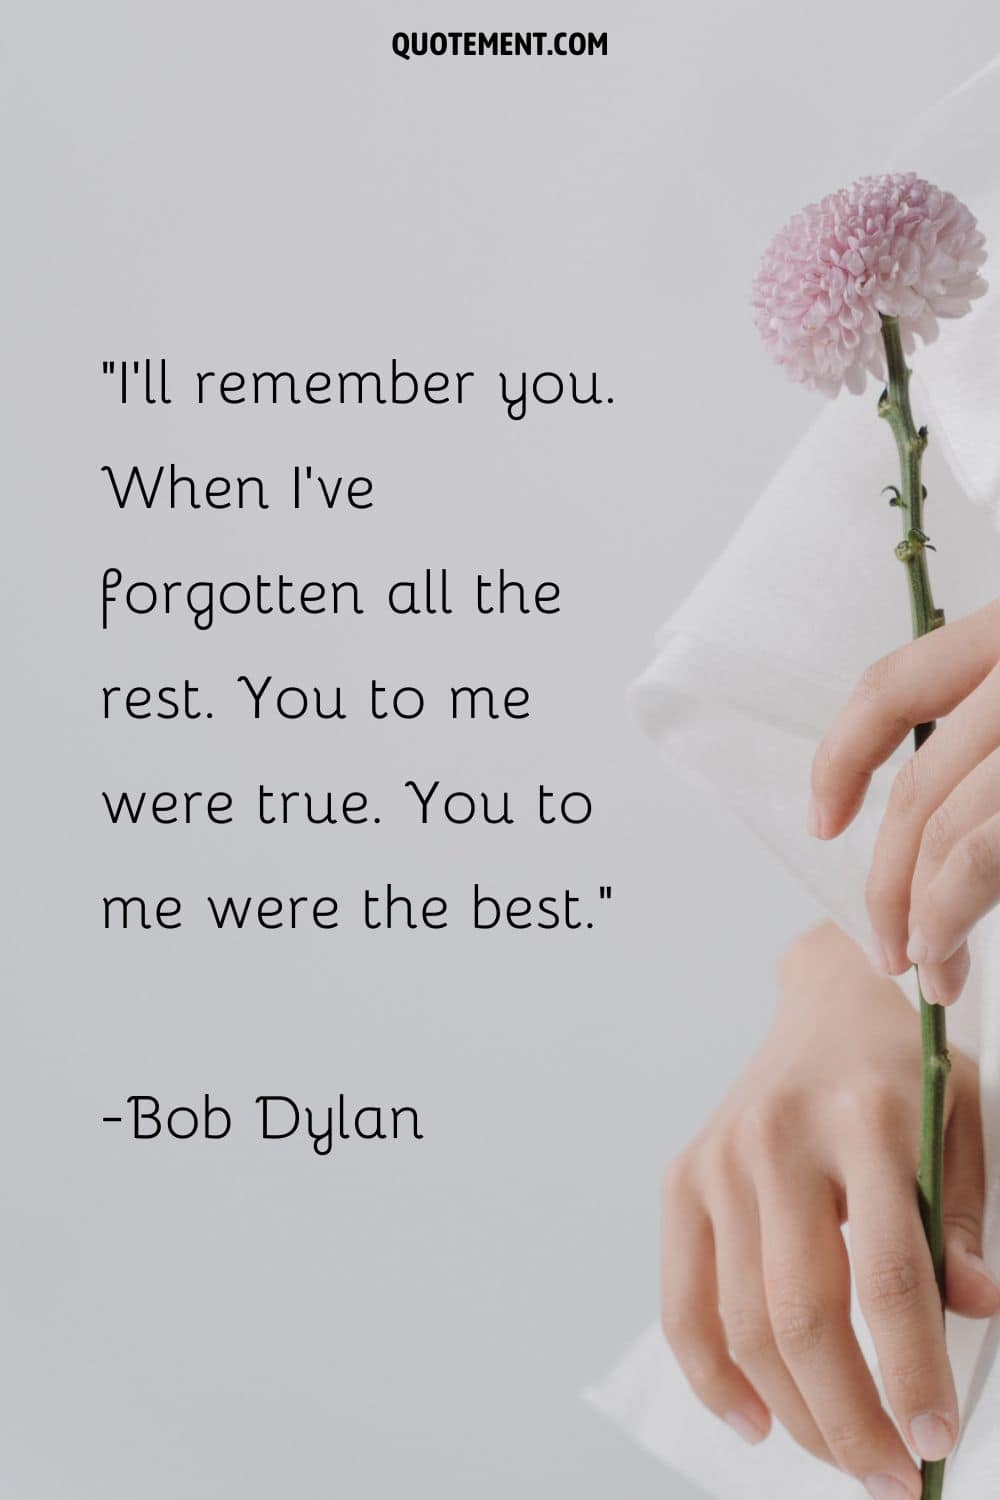 I'll remember you. When I've forgotten all the rest. You to me were true. You to me were the best.